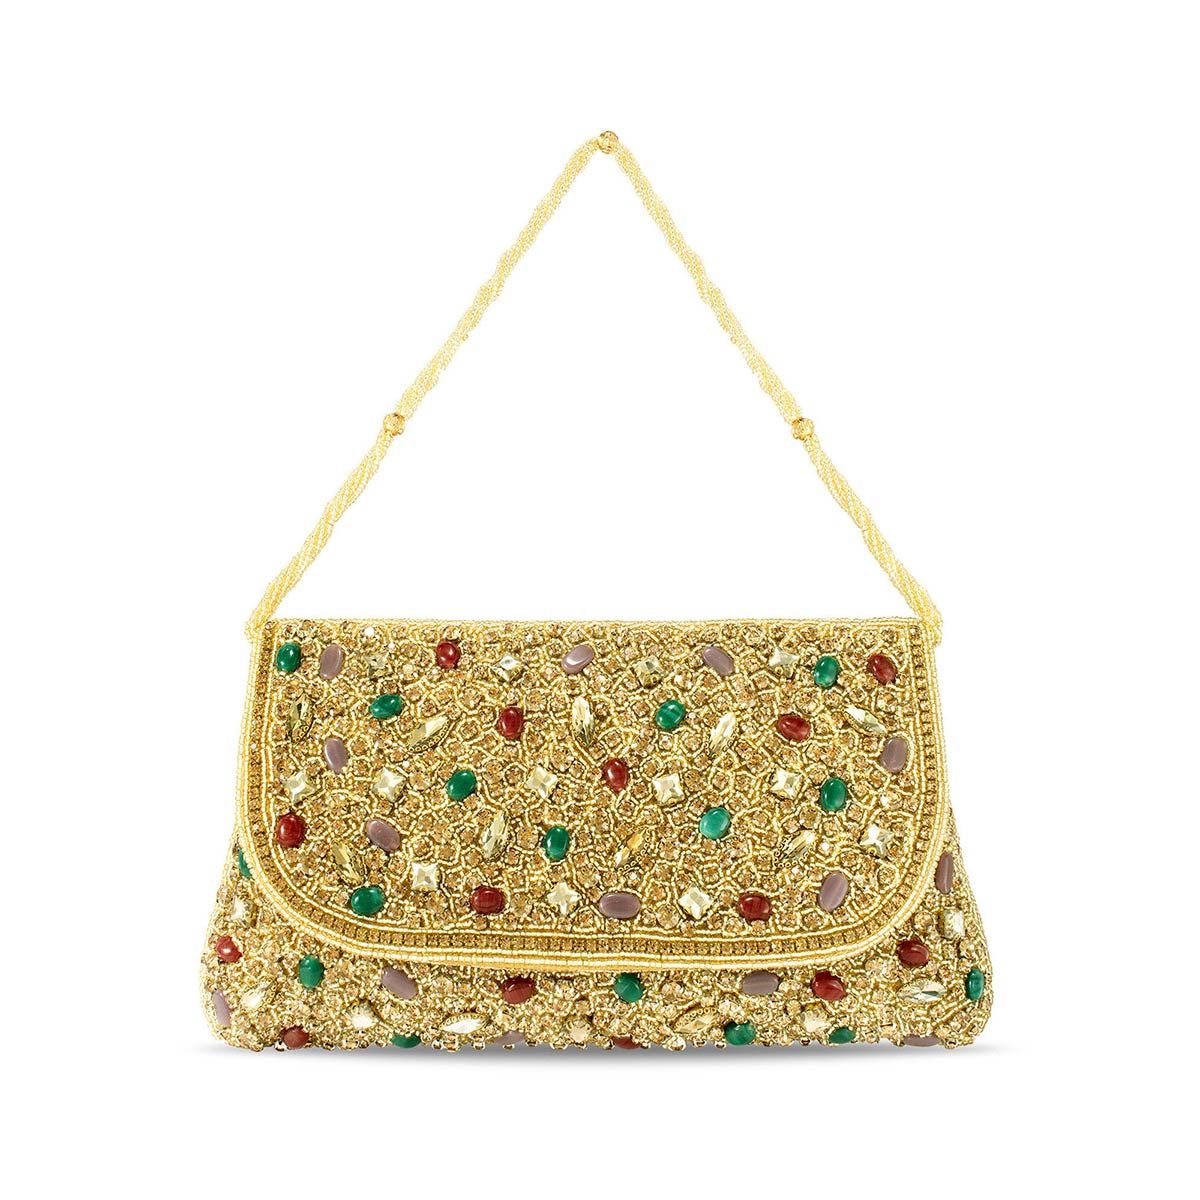 Indian traditional Bridal Clutch Colour Gold | eBay